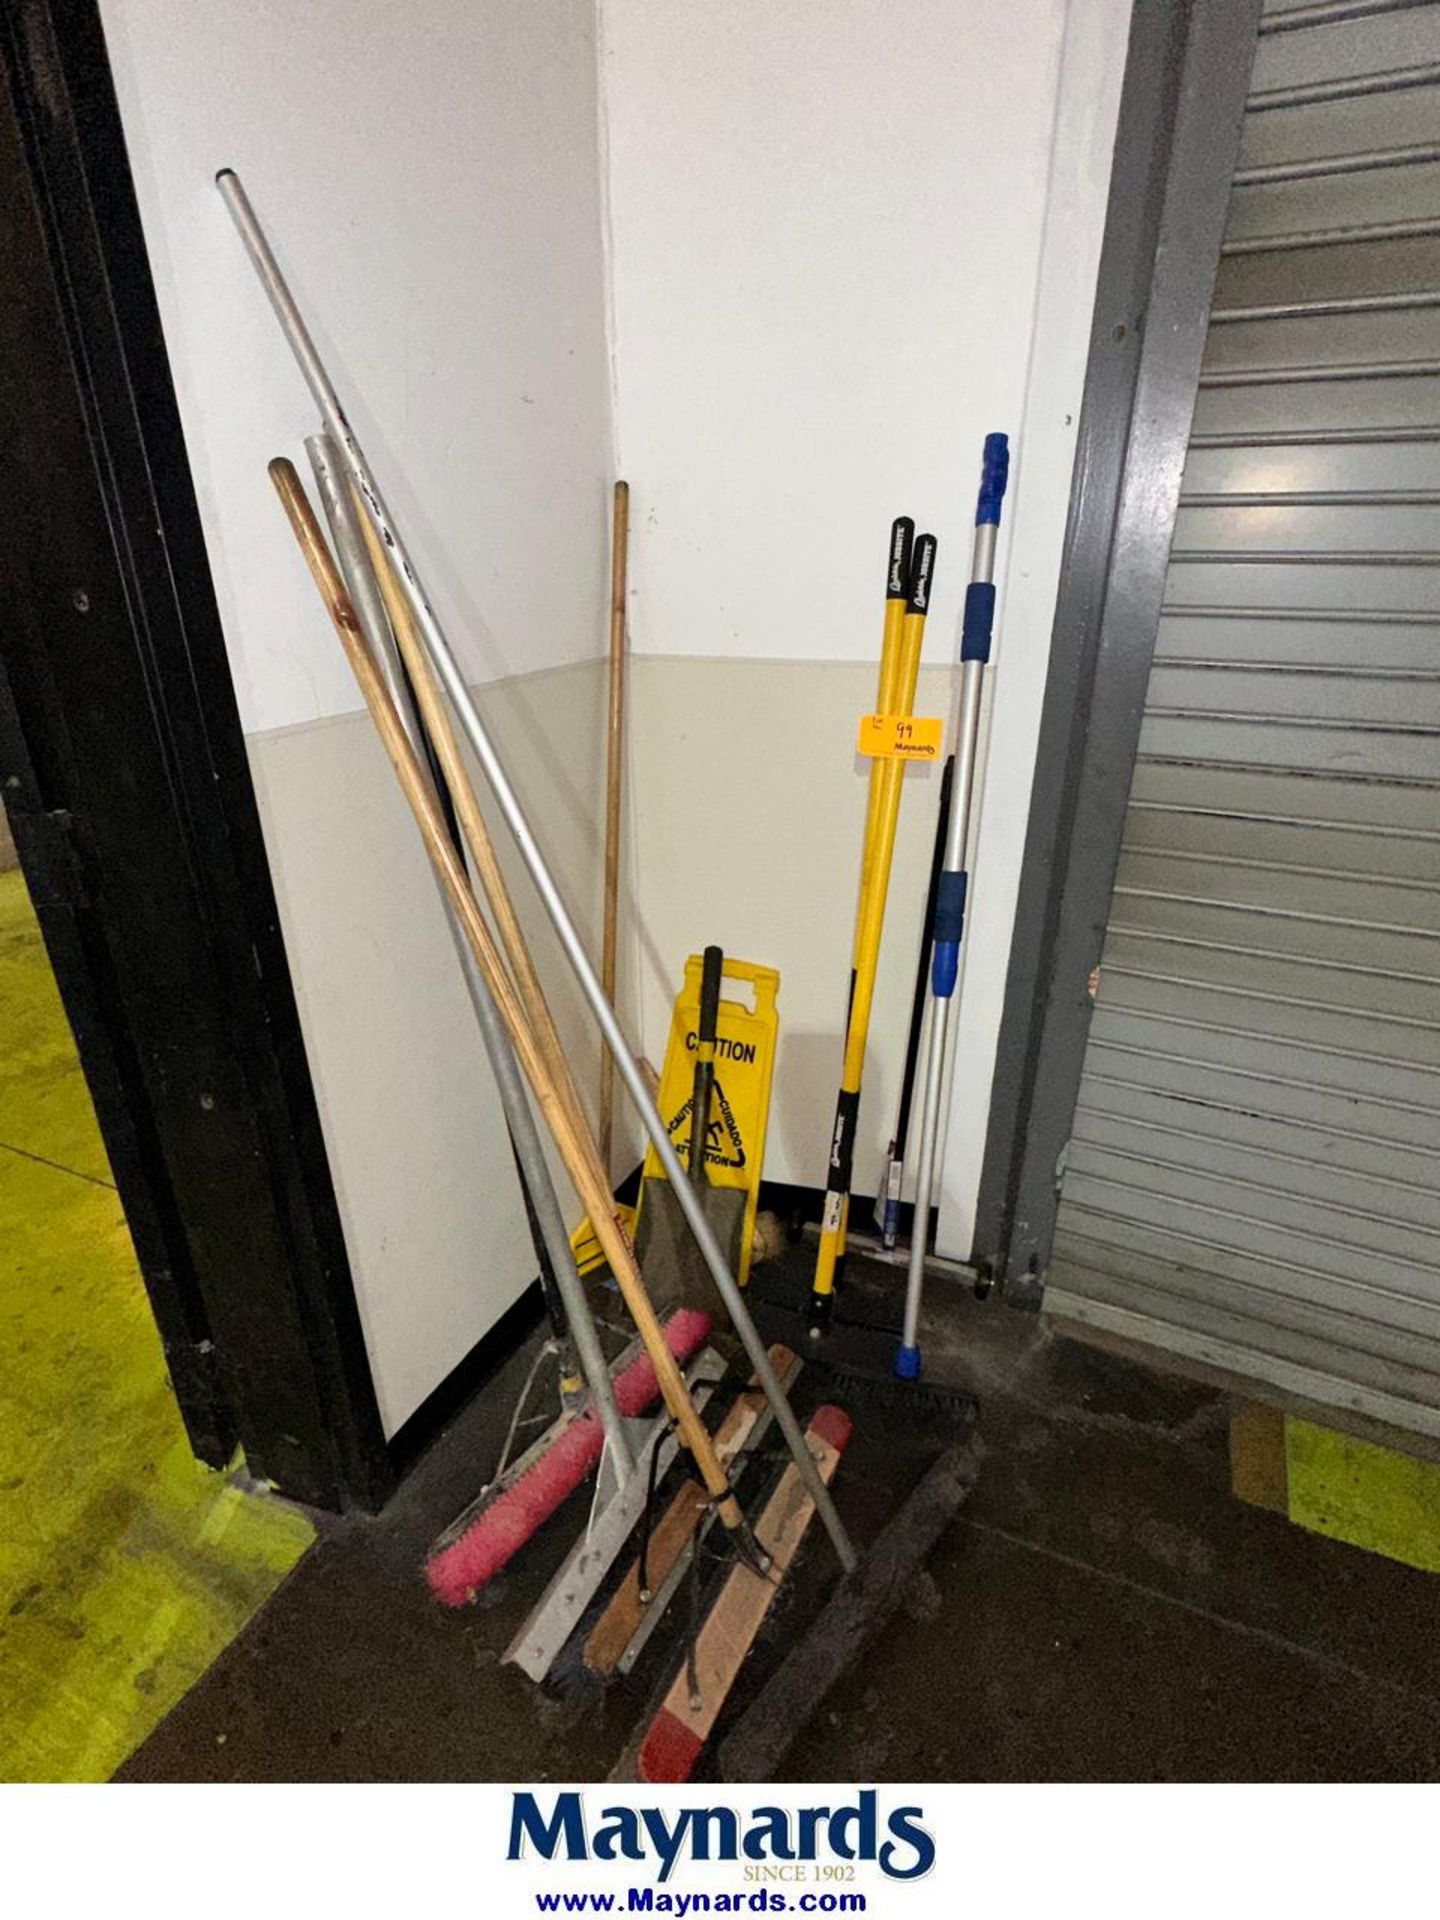 Lot of Brooms and Shop Vacs - Image 2 of 2